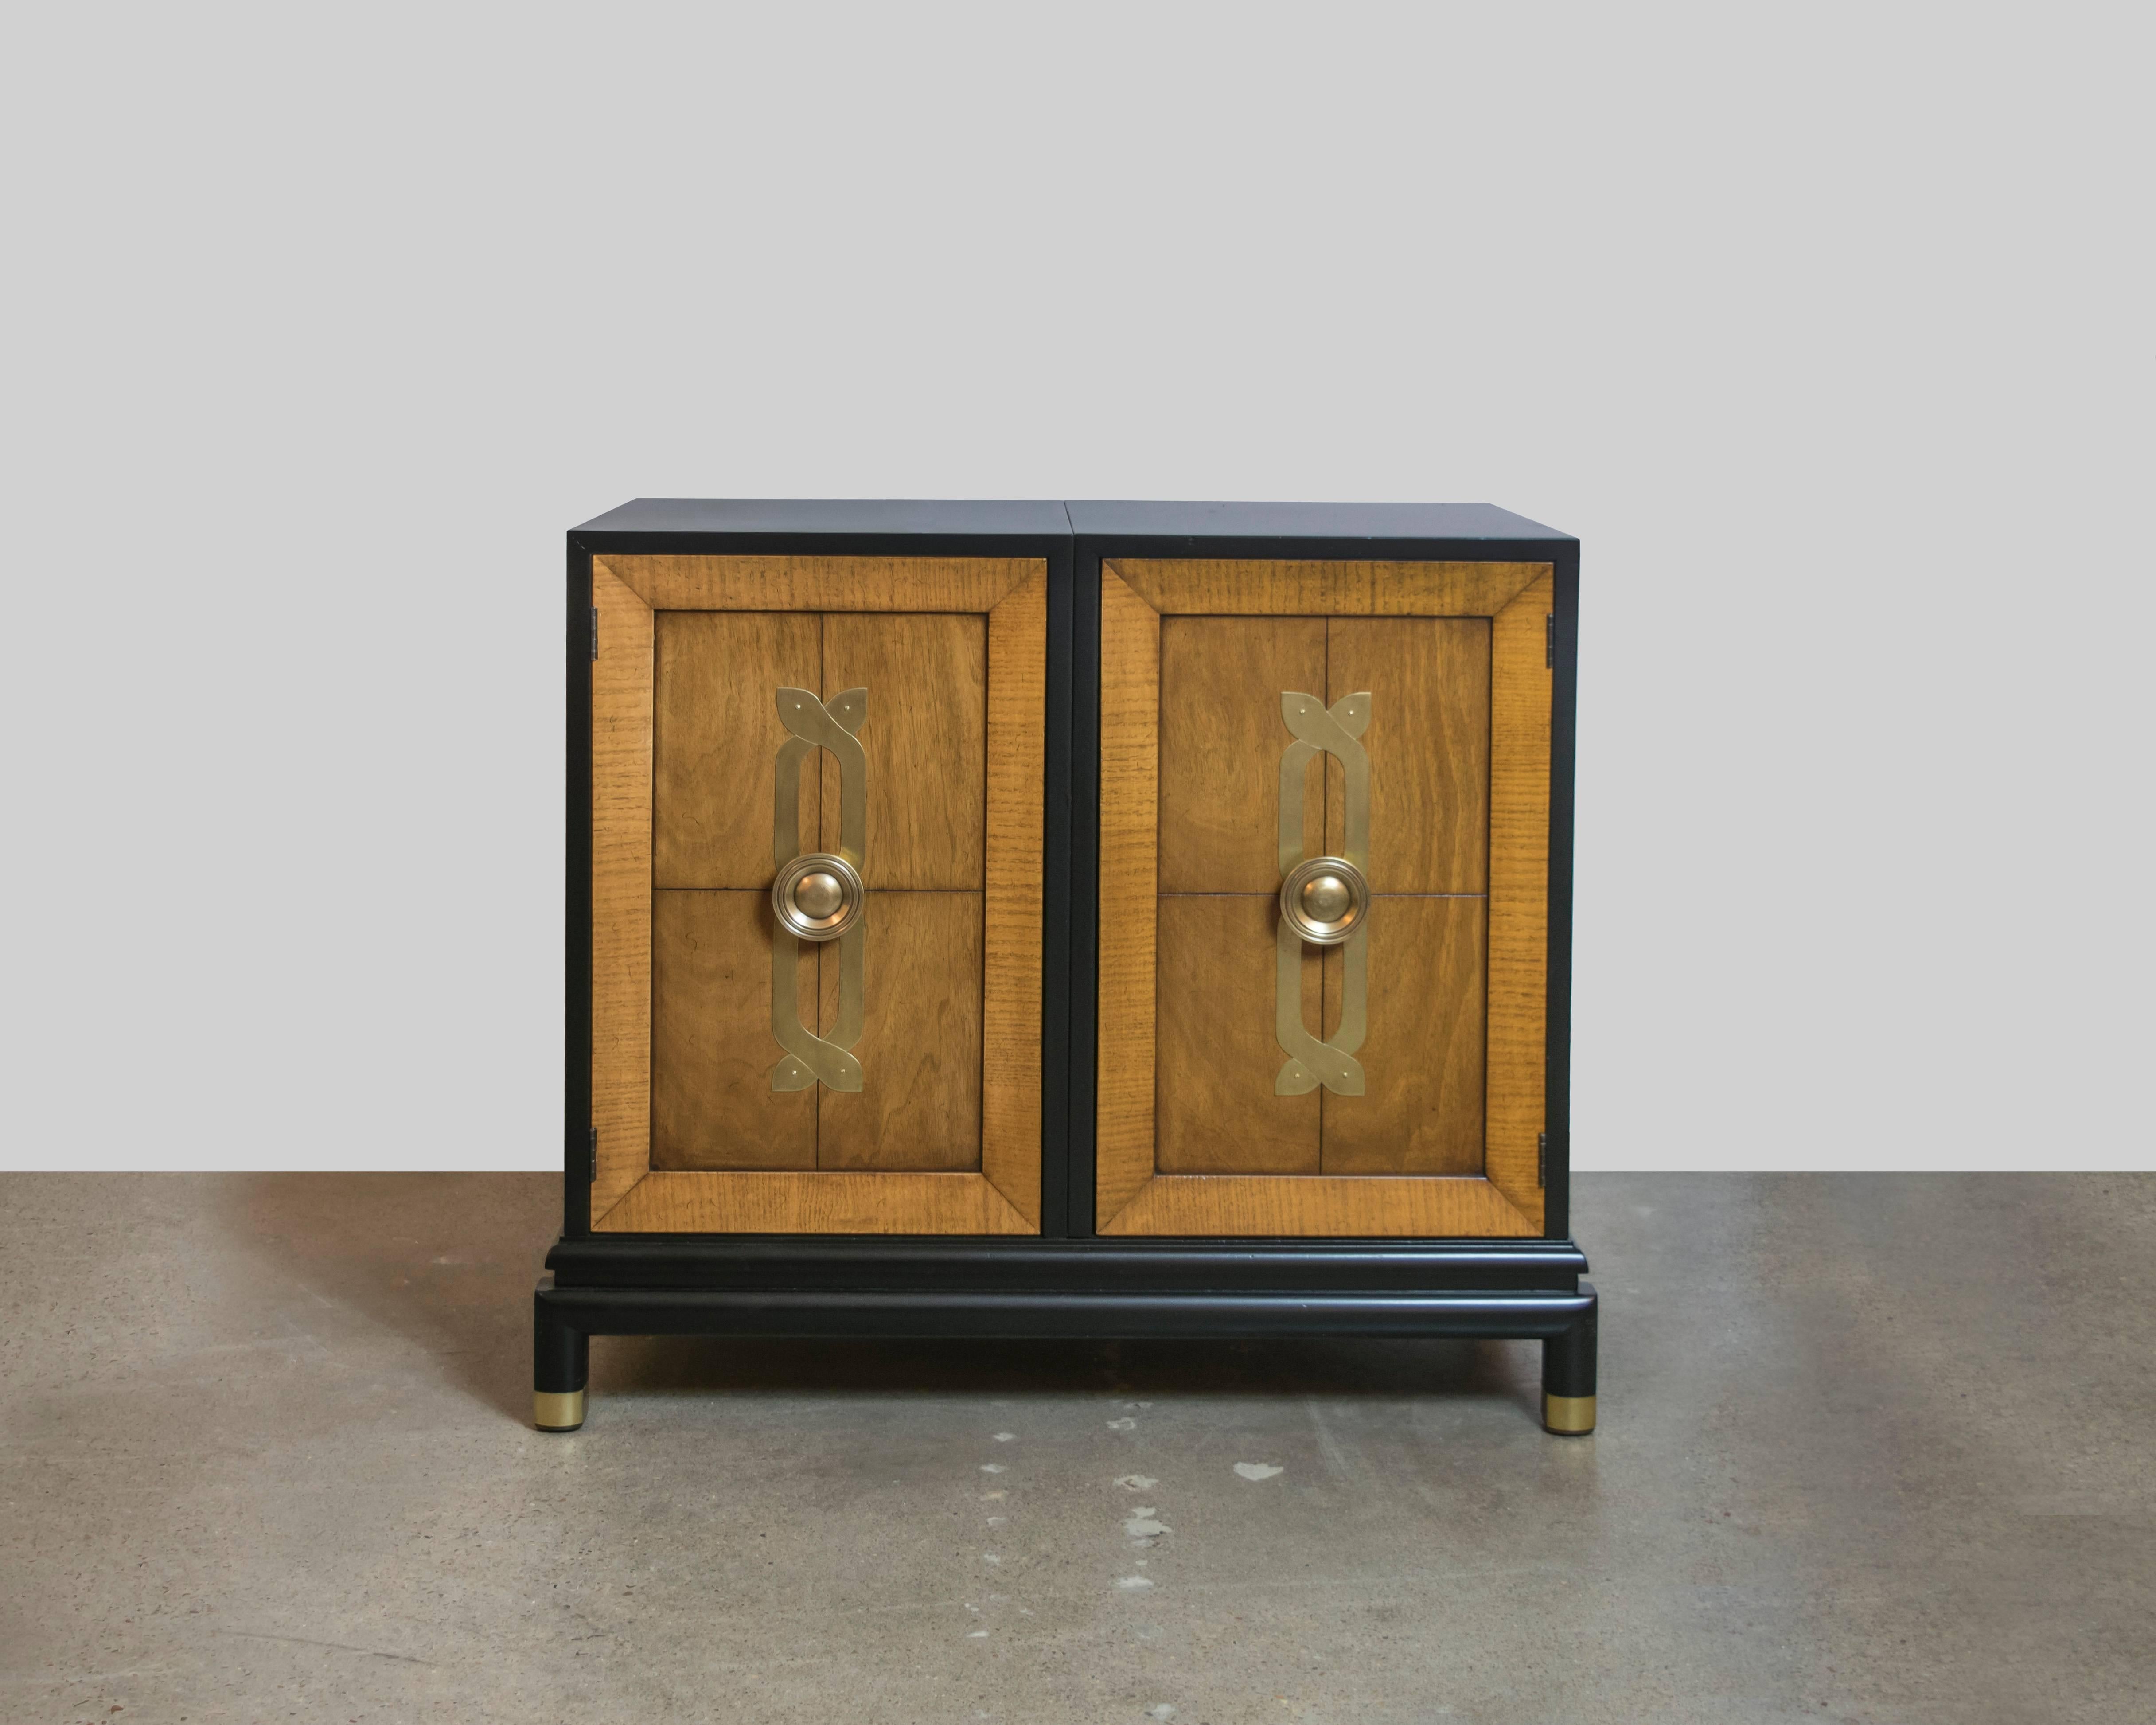 Here's a knockout pair of Renzo Rutili chests for Johnson Furniture manufactured in the 1960s. These oversized commodes are made of a combination of materials beginning with the outer cabinet which is ebonized lacquer over mahogany. The cabinet